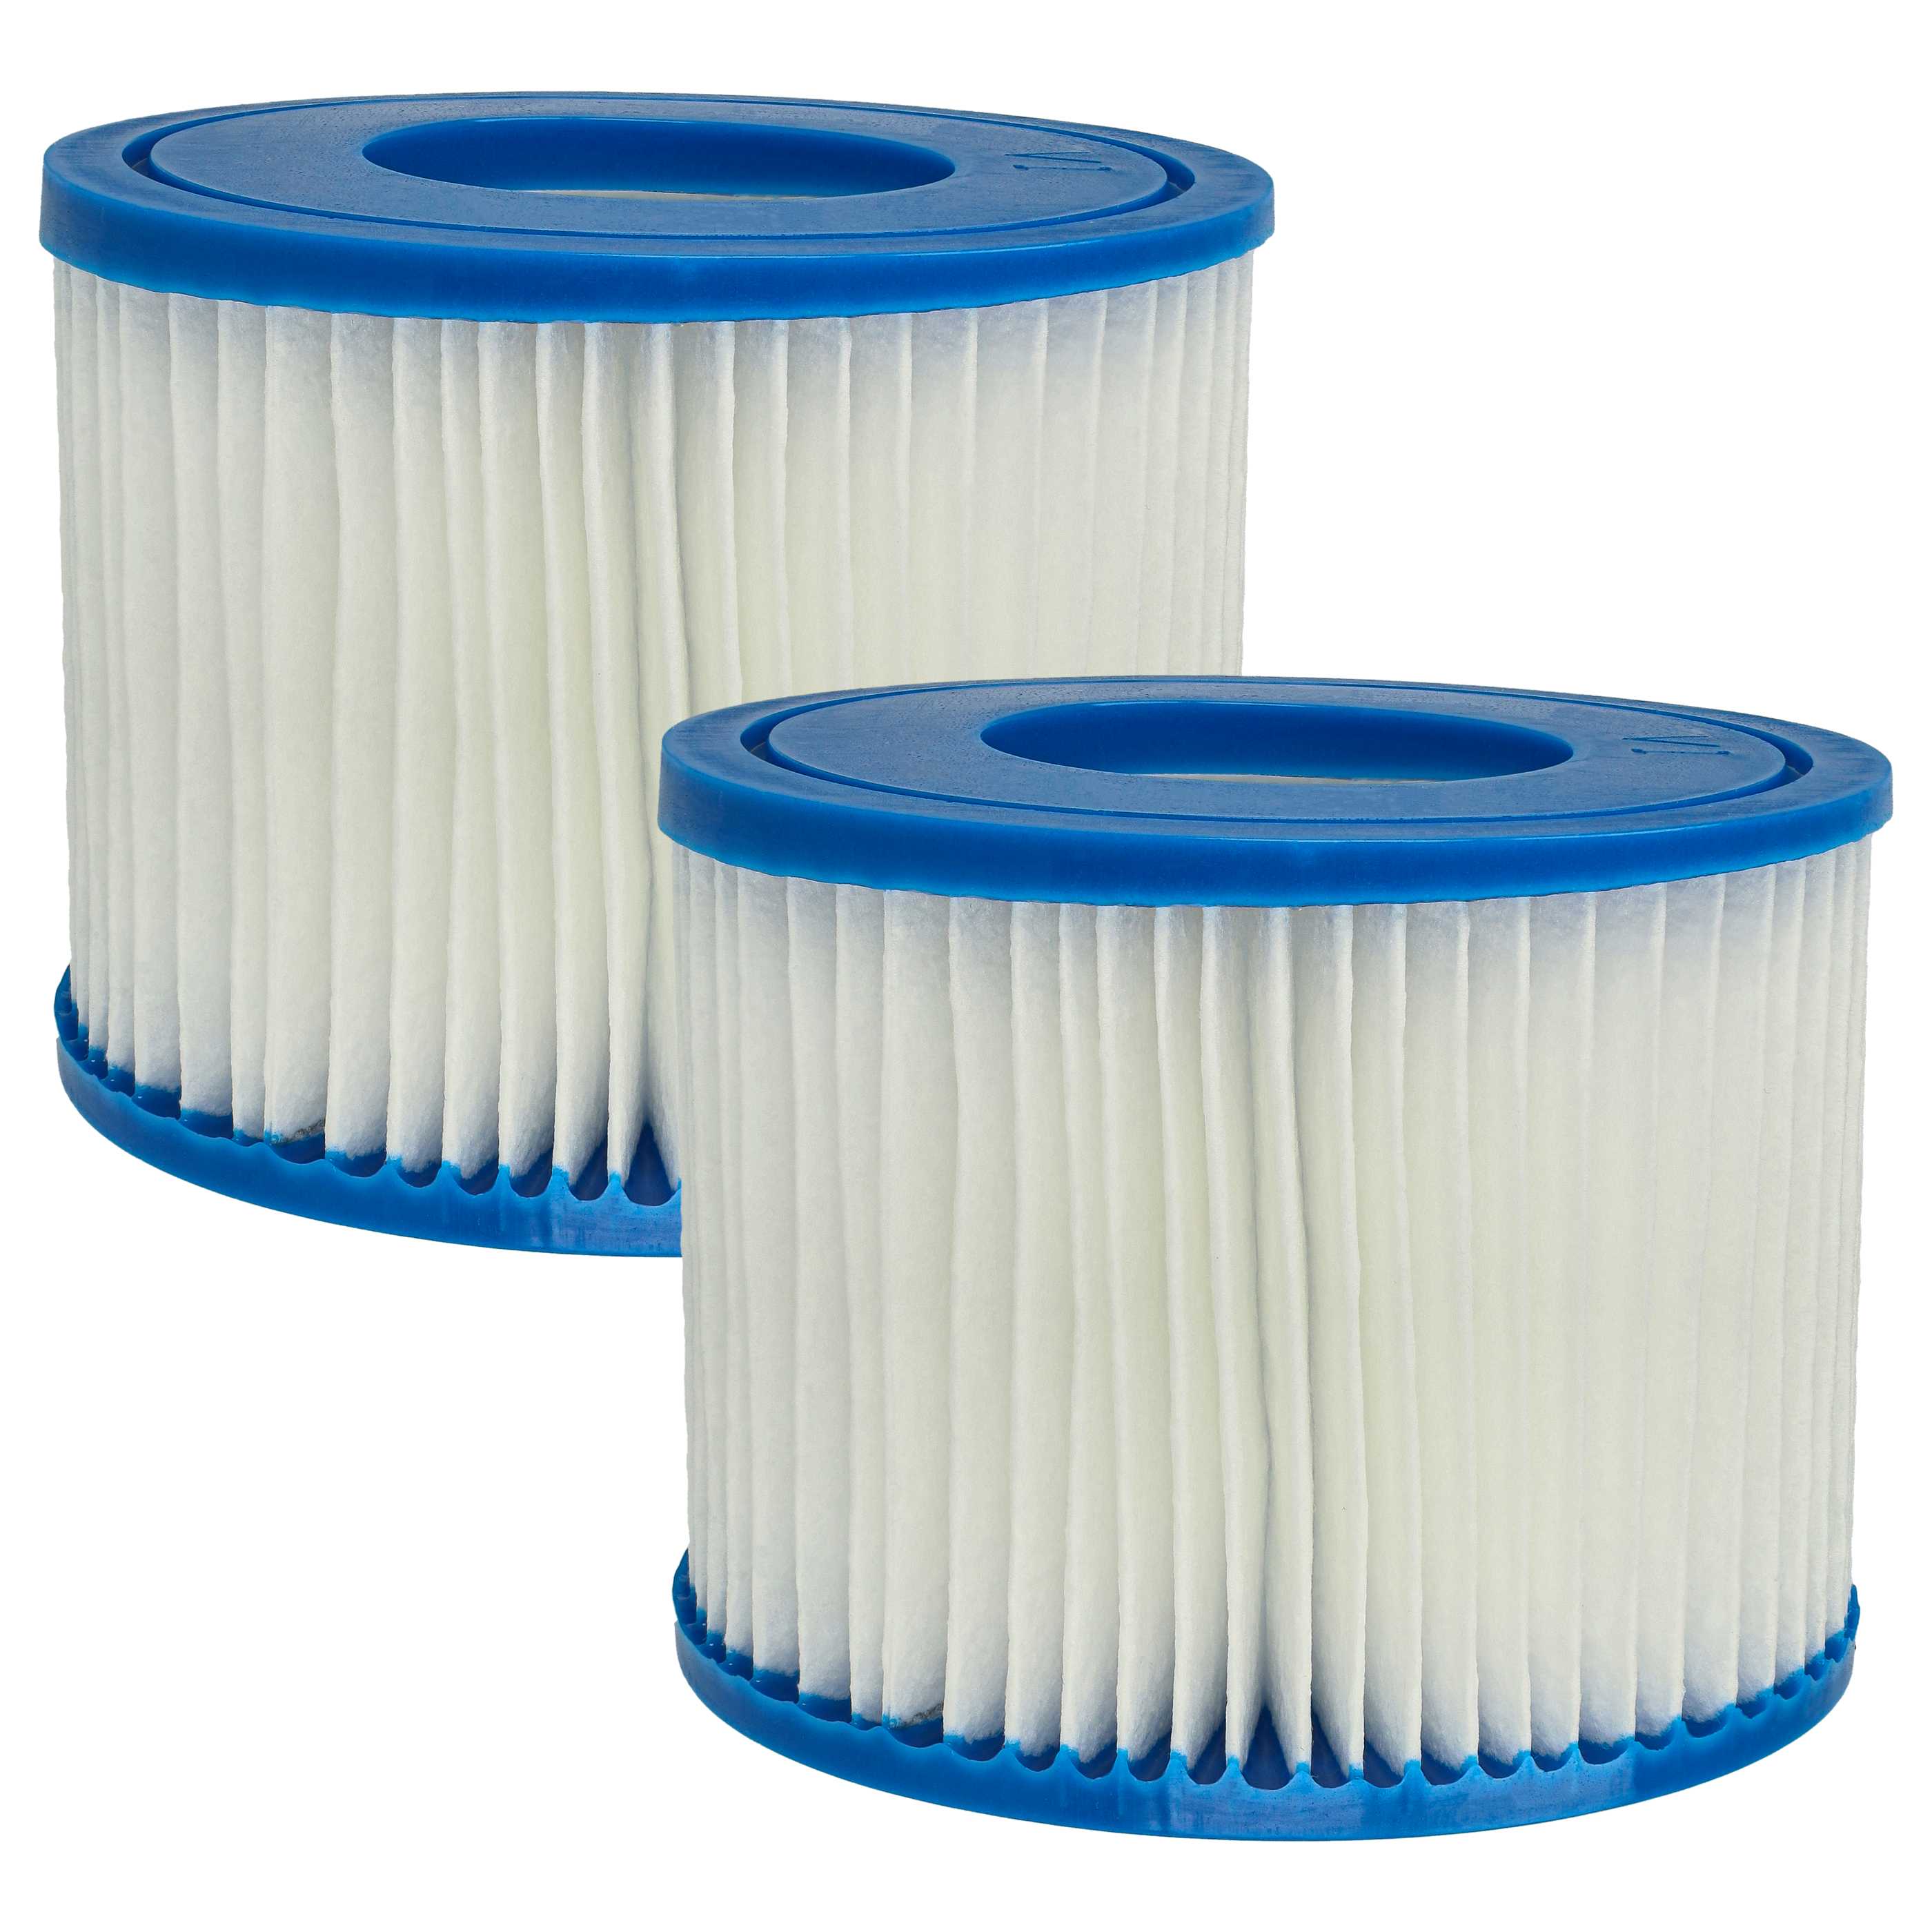 2x Pool Filter Type VI as Replacement for Bestway Typ VI, FD2134 - Filter Cartridge